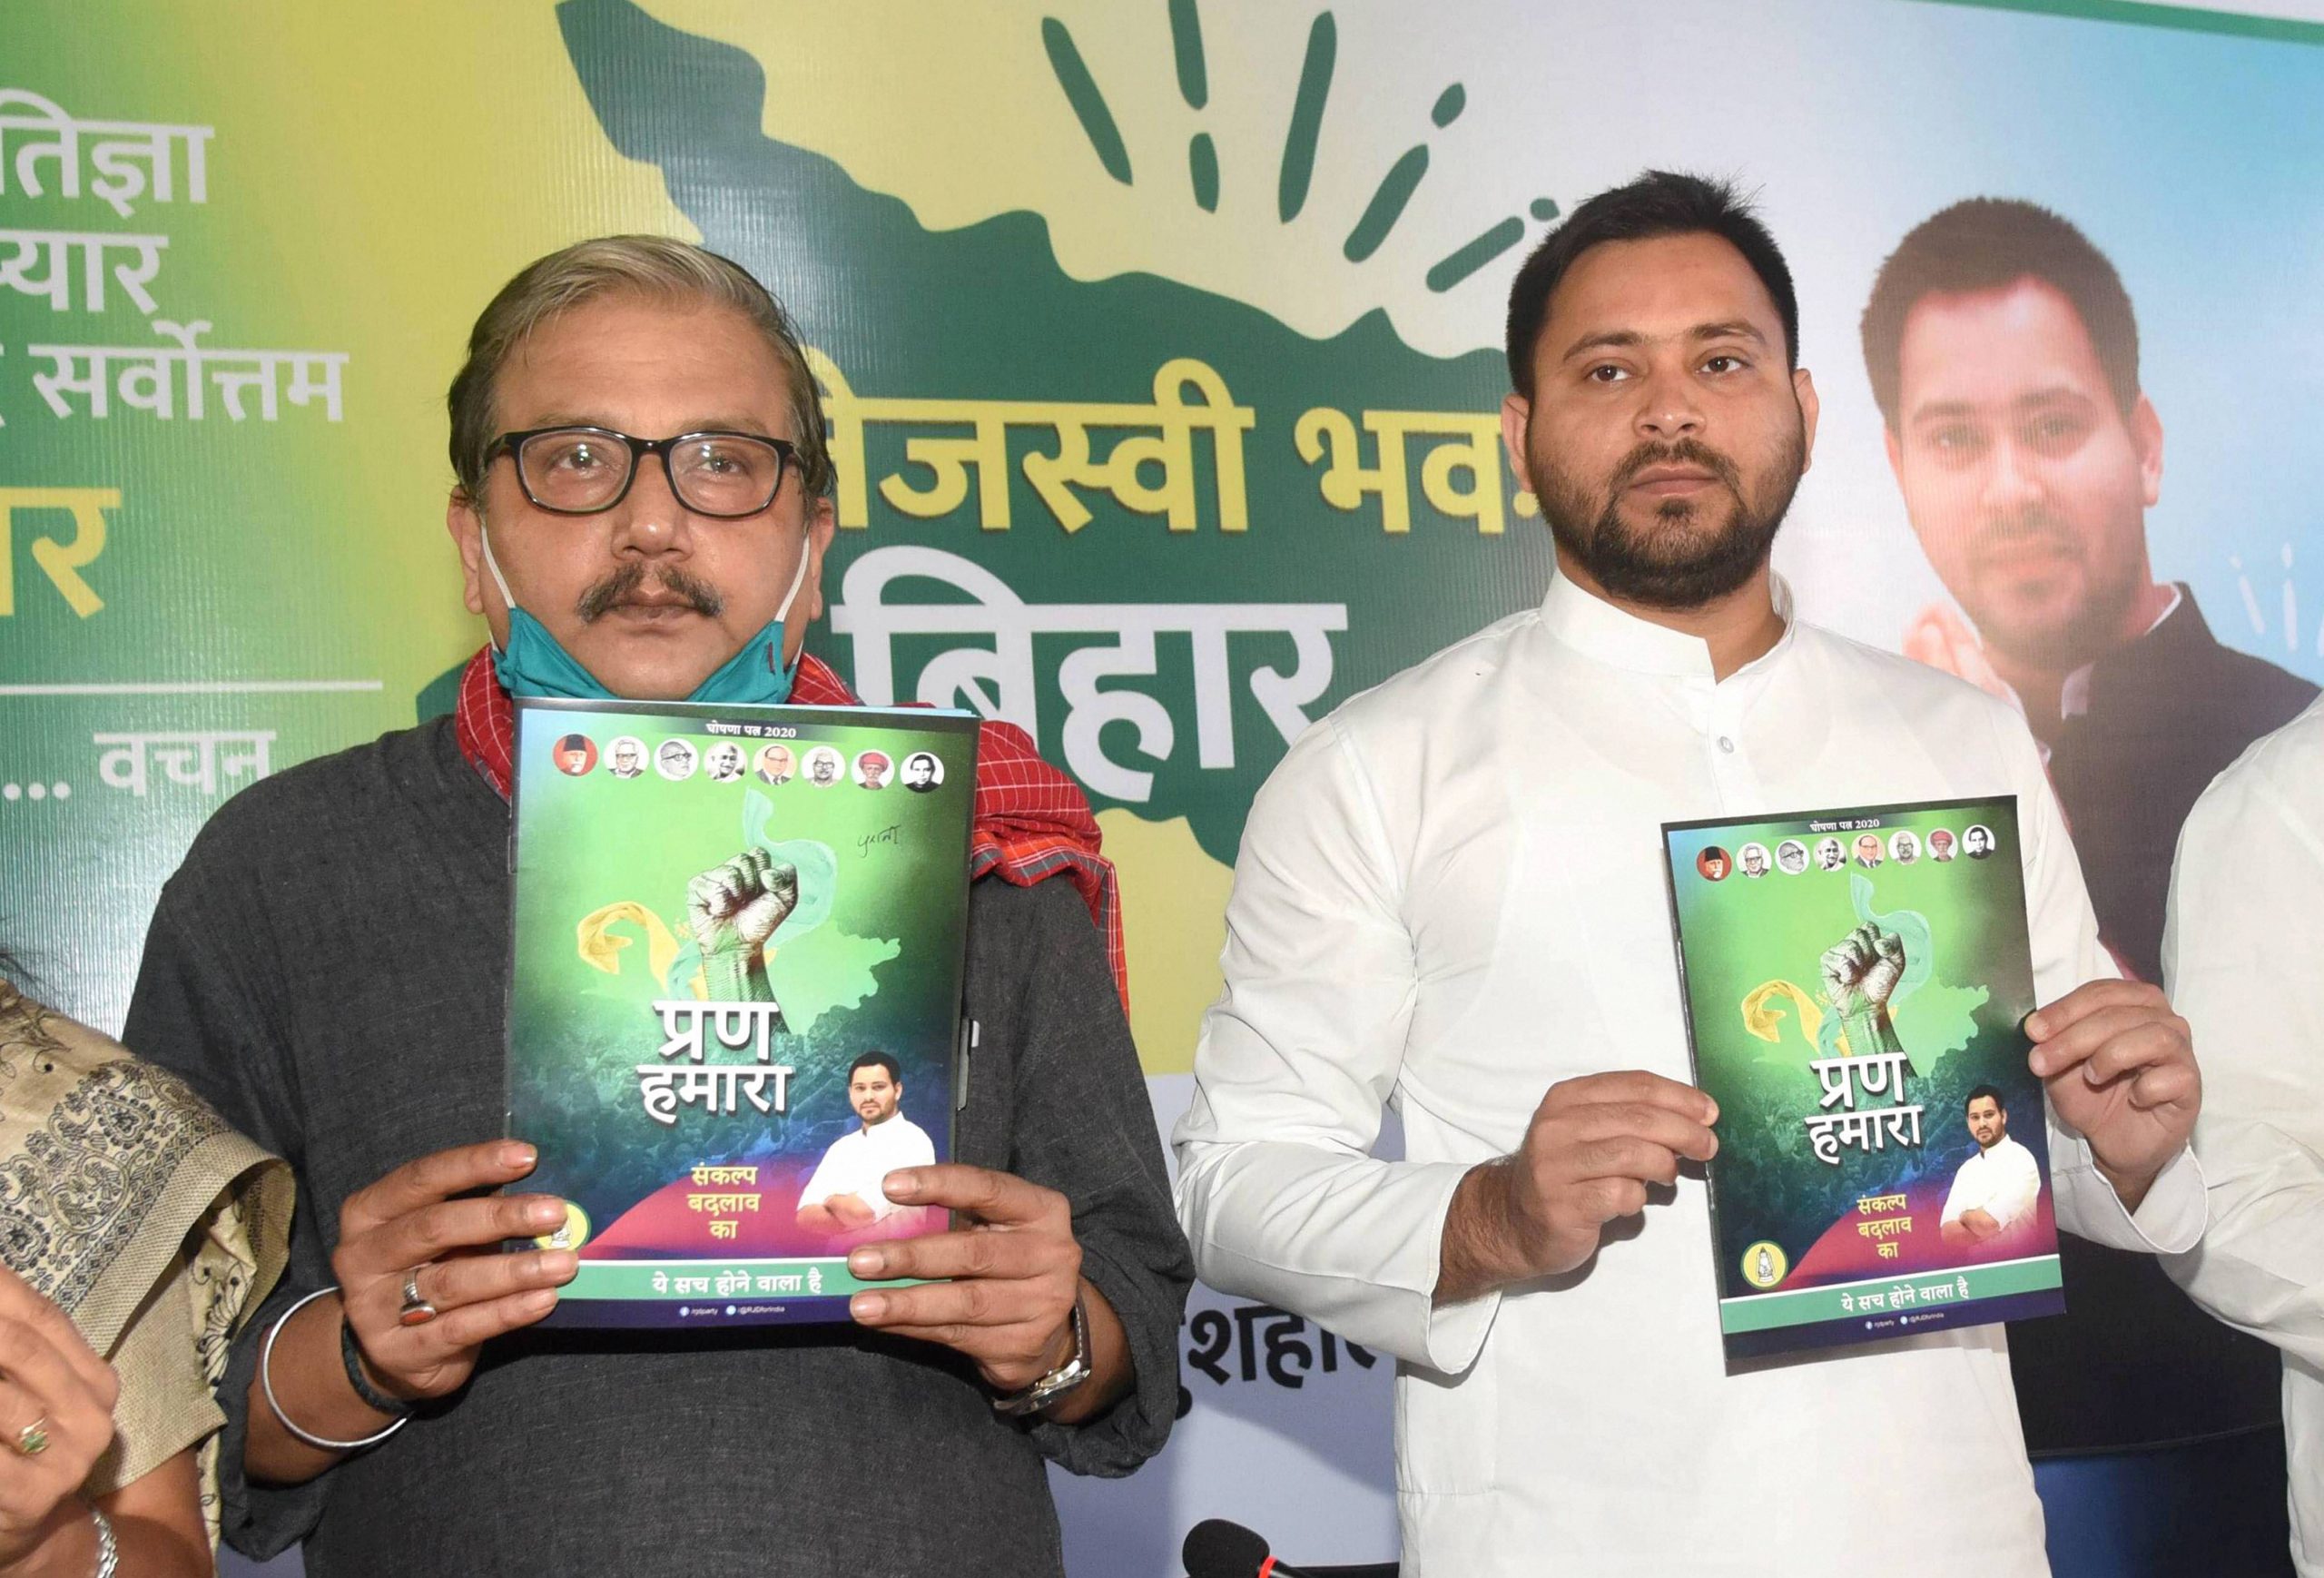 Tejashwi Yadav questions BJP’s promise of providing jobs while launching party’s manifesto